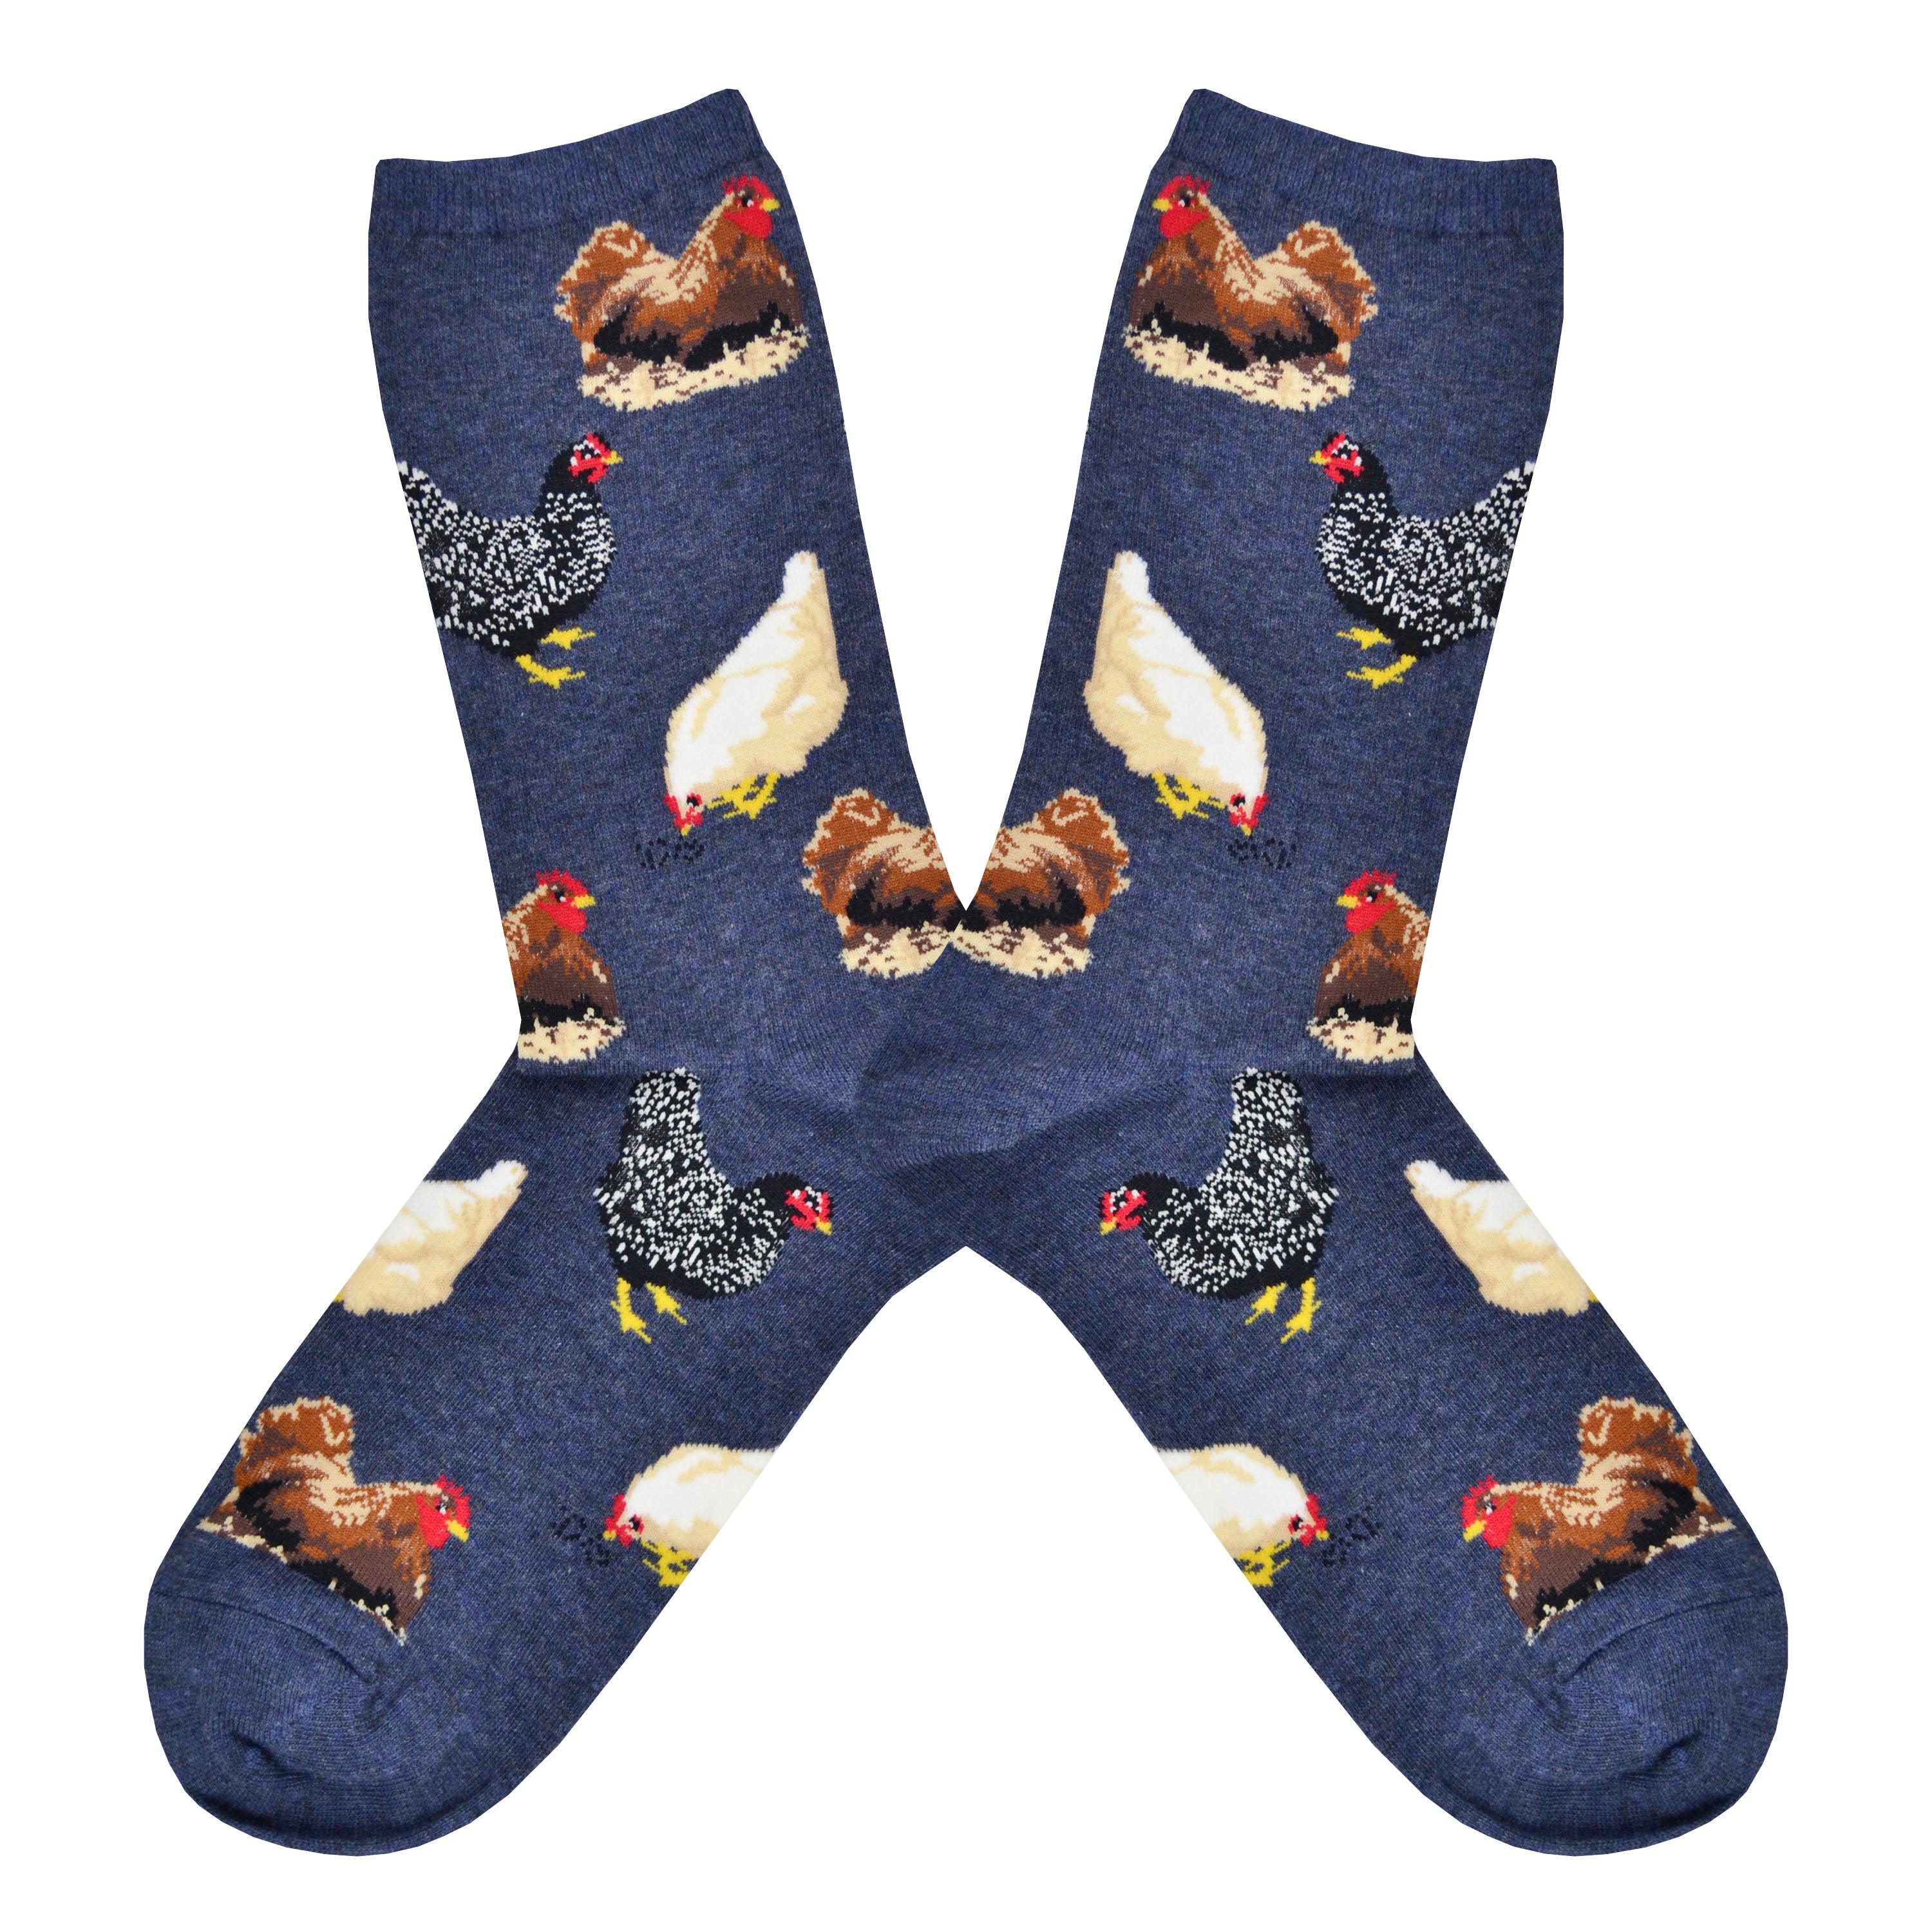 Shown in a flatlay, a pair of Socksmith brand women's cotton crew sock in navy with multi-colored hens all over the sock.